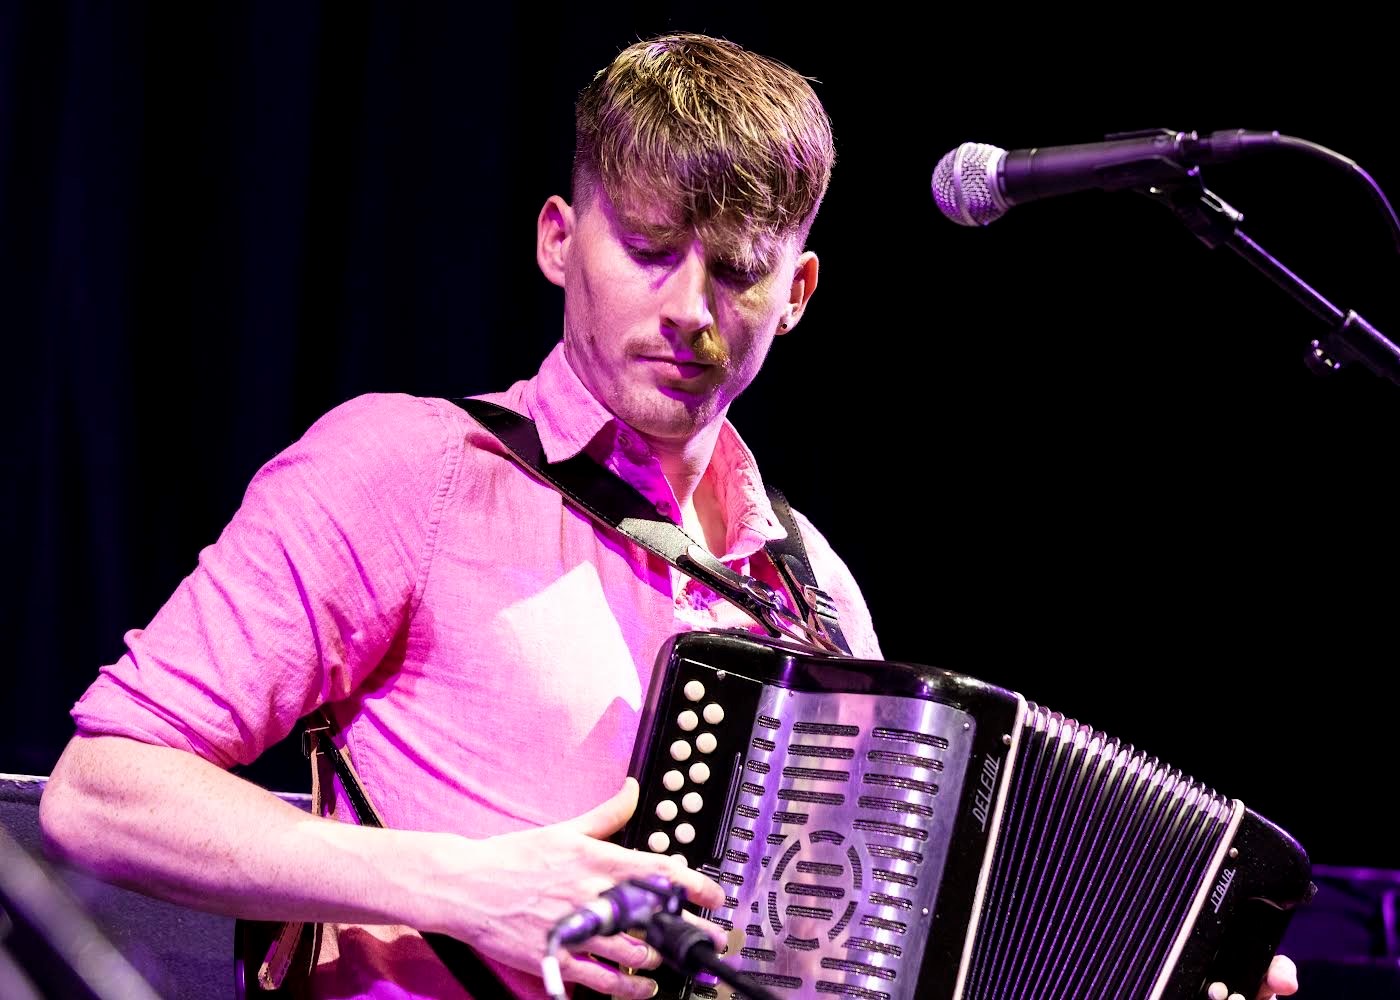 Young Musician of the Year 2019, Conor Connolly